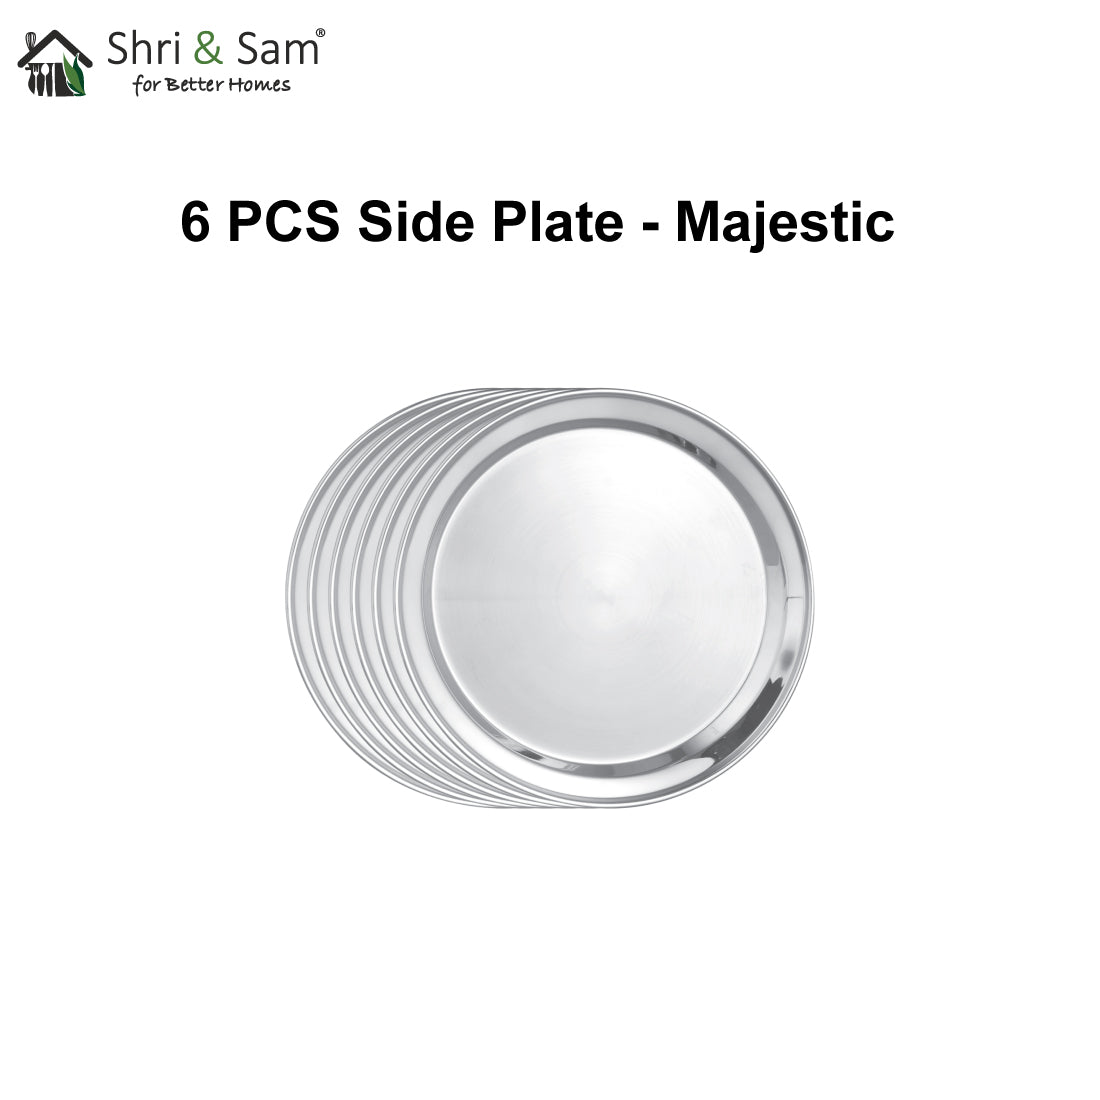 Stainless Steel 6 PCS Side Plate Majestic